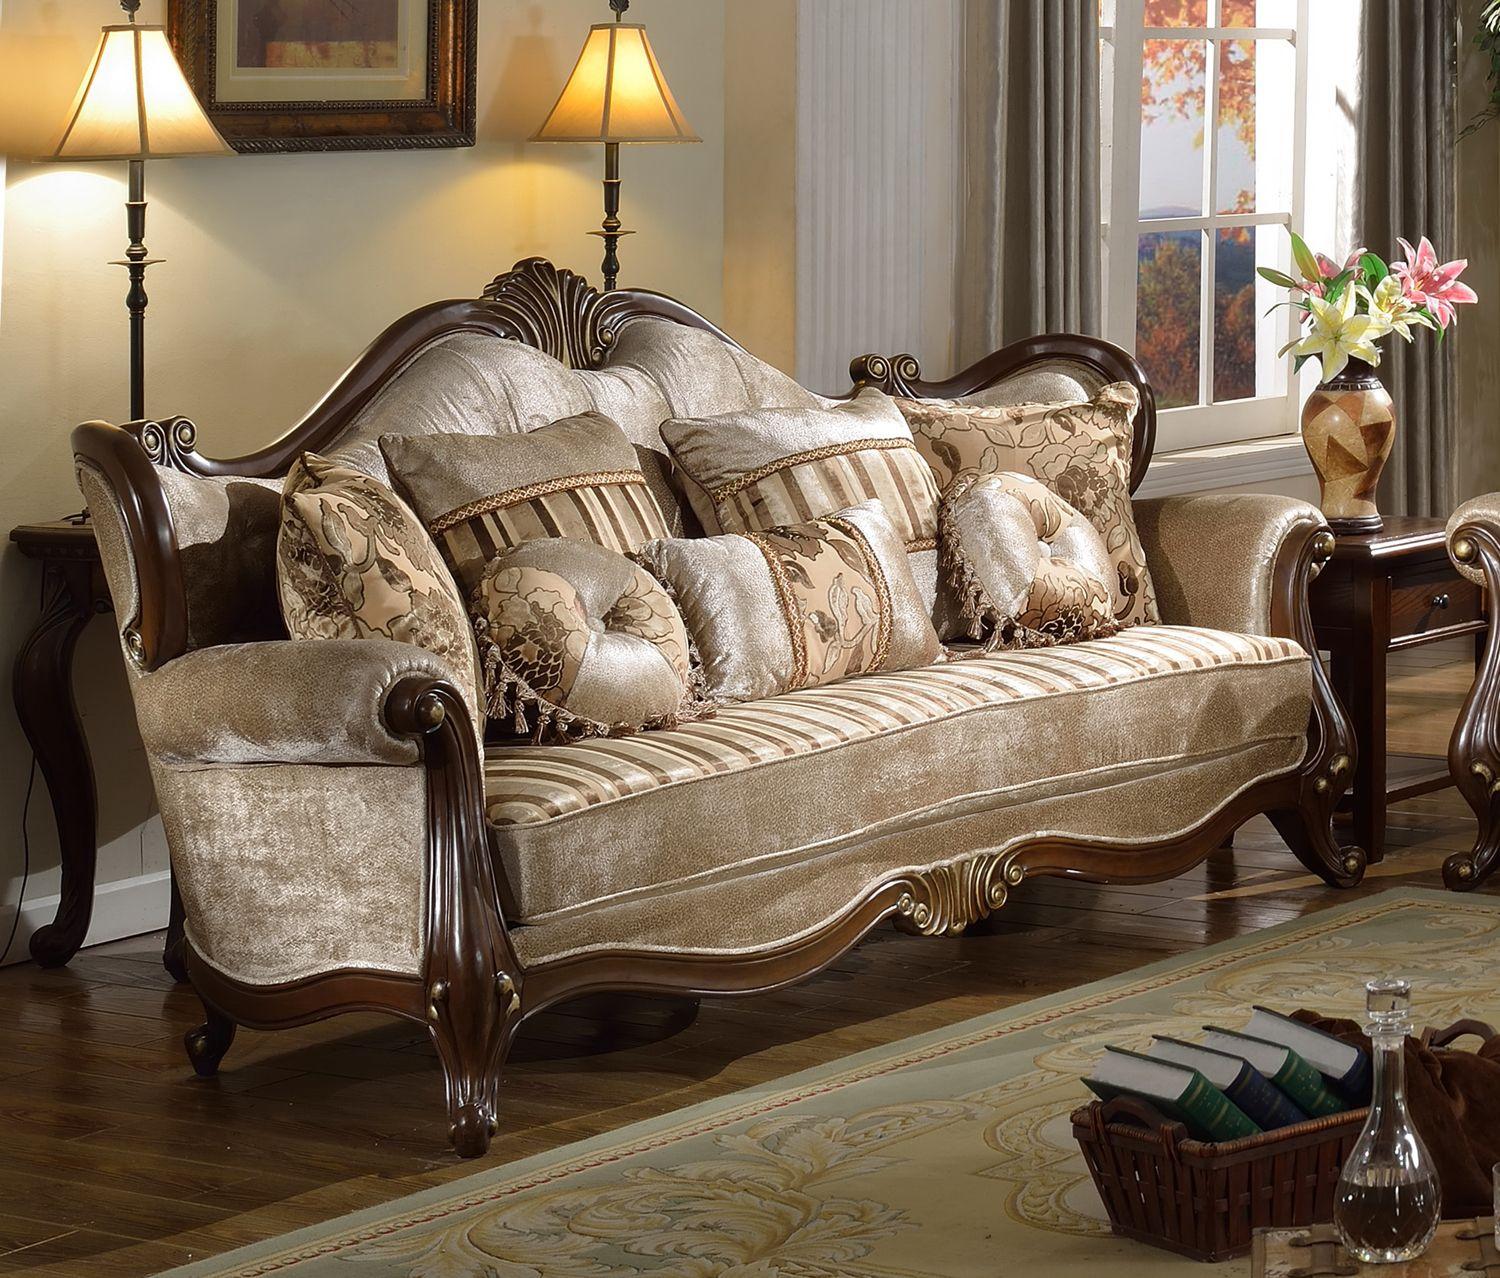 

    
French Beige Chenille Cherry Carved Wood Sofa Set 2Pcs Traditioanal McFerran SF8700
